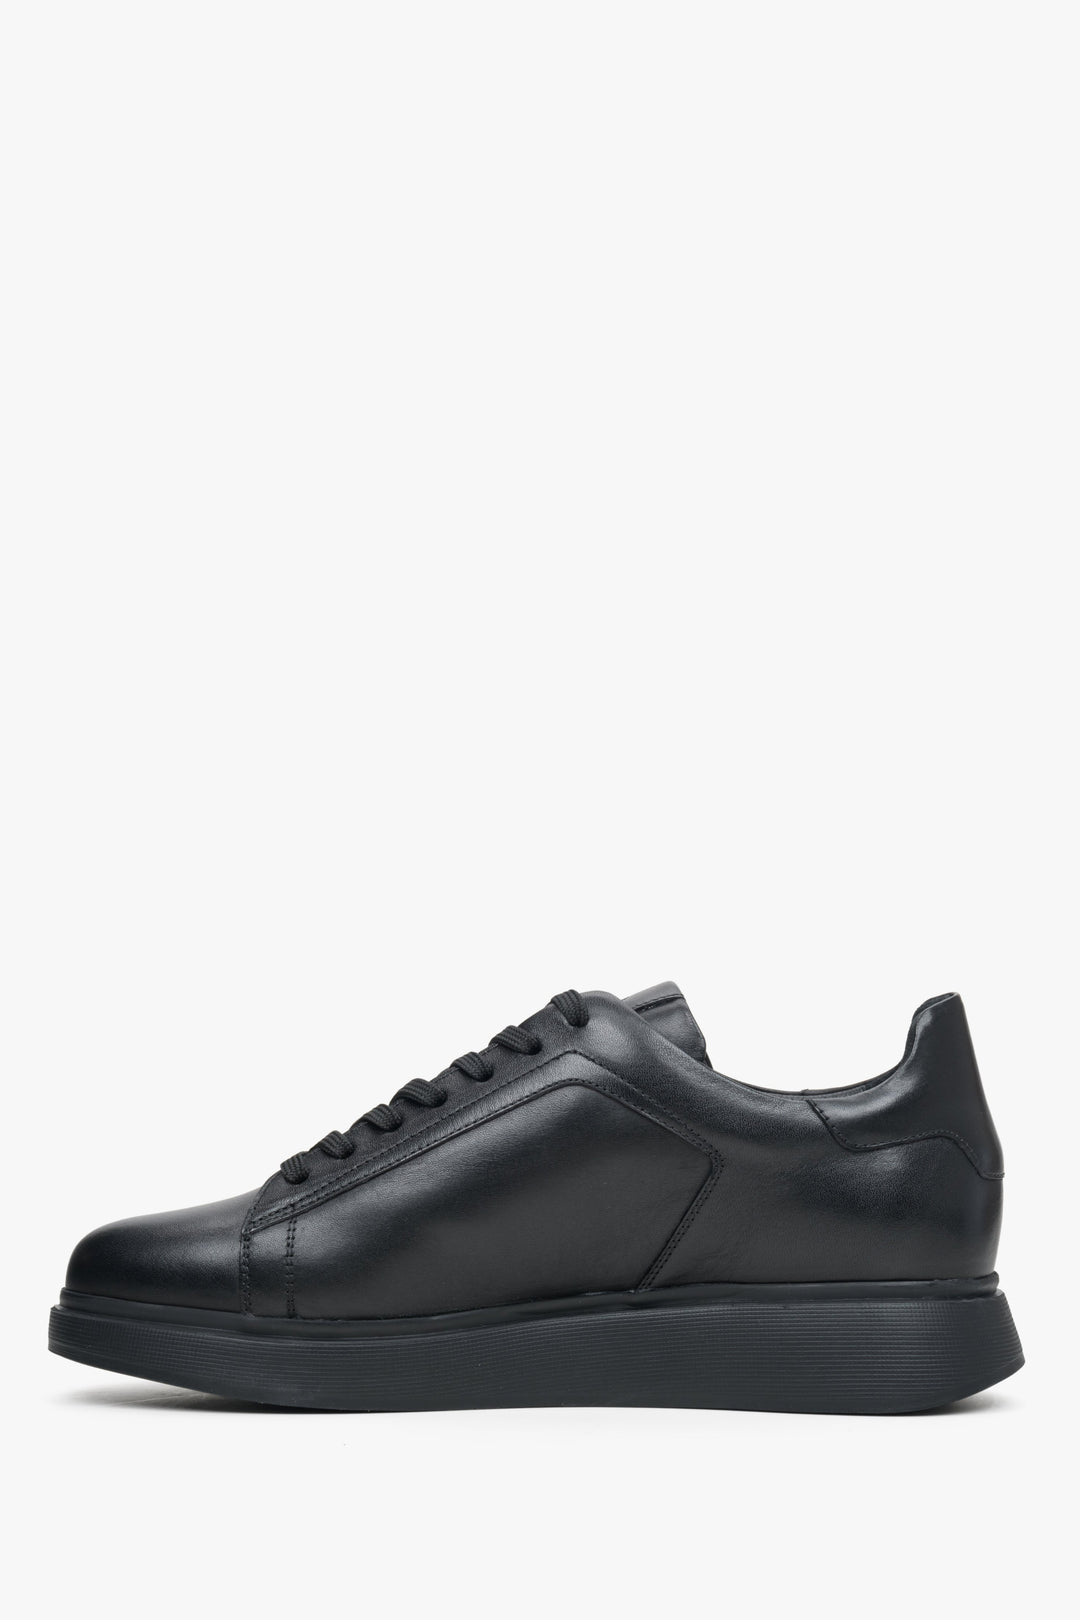 Men's black leather sneakers with lacing by Estro - shoe profile.